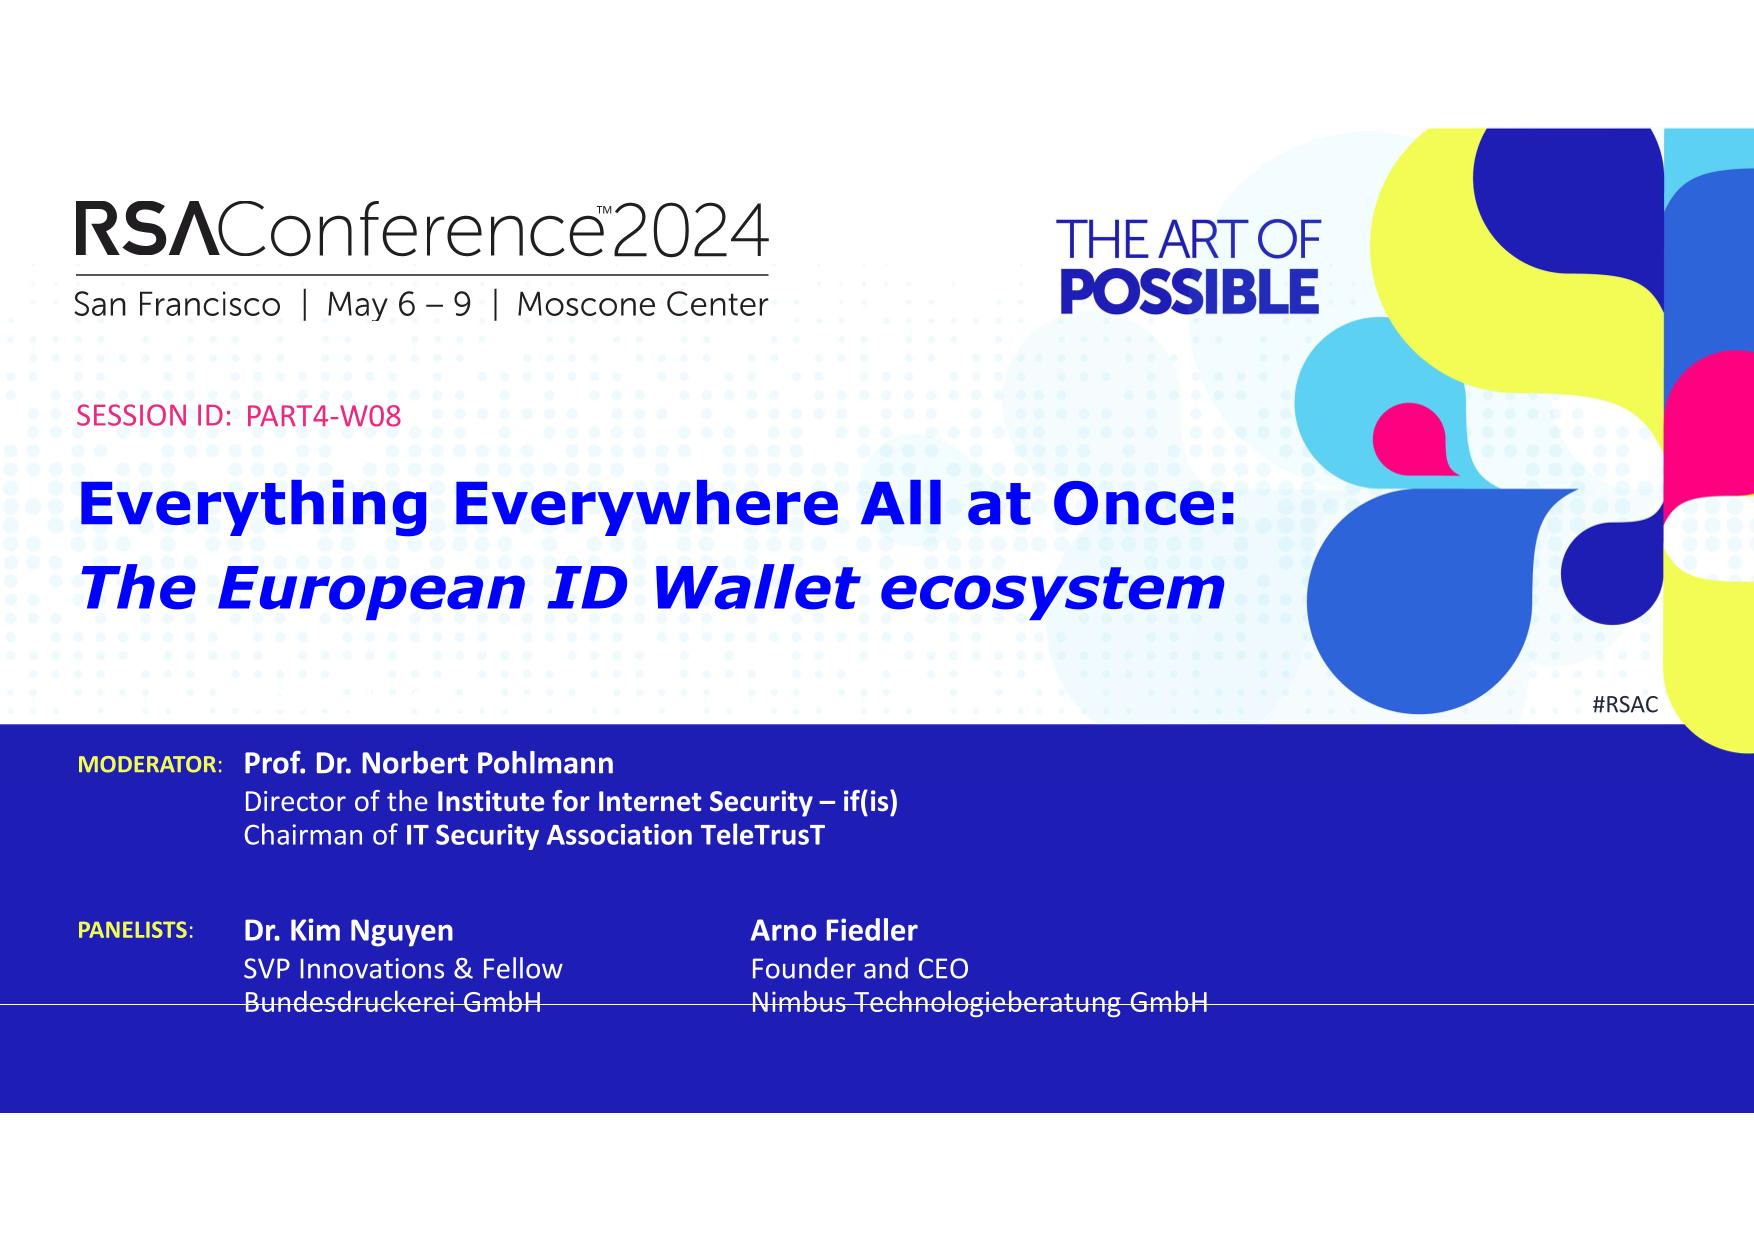 Everything Everywhere All at Once - The European ID Wallet ecosystem